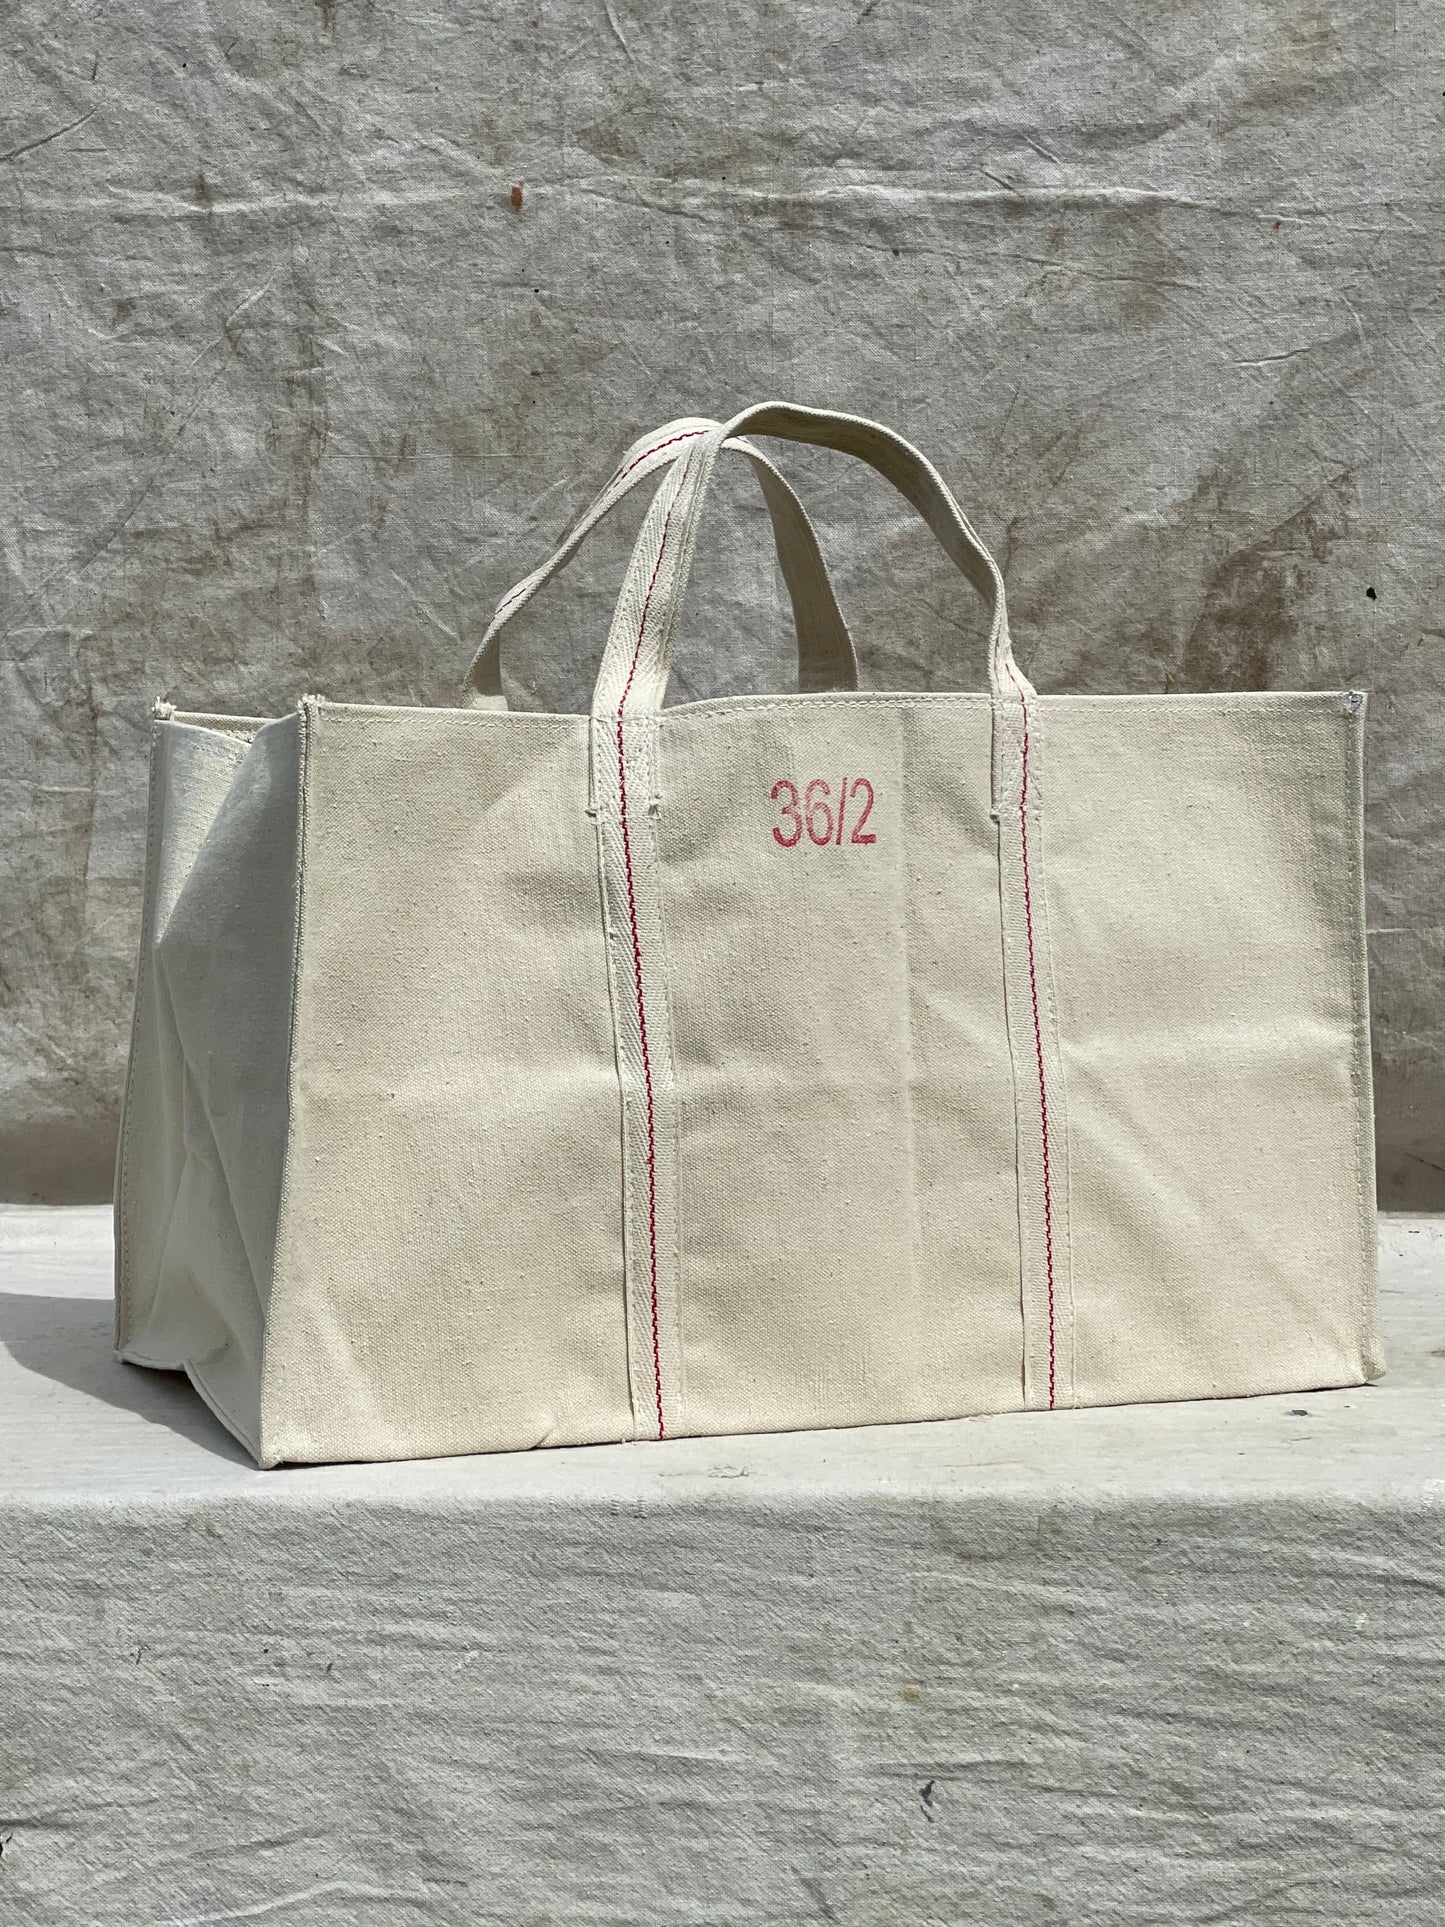 Heavy Duty Natural Canvas Tote Bag Size 36/2